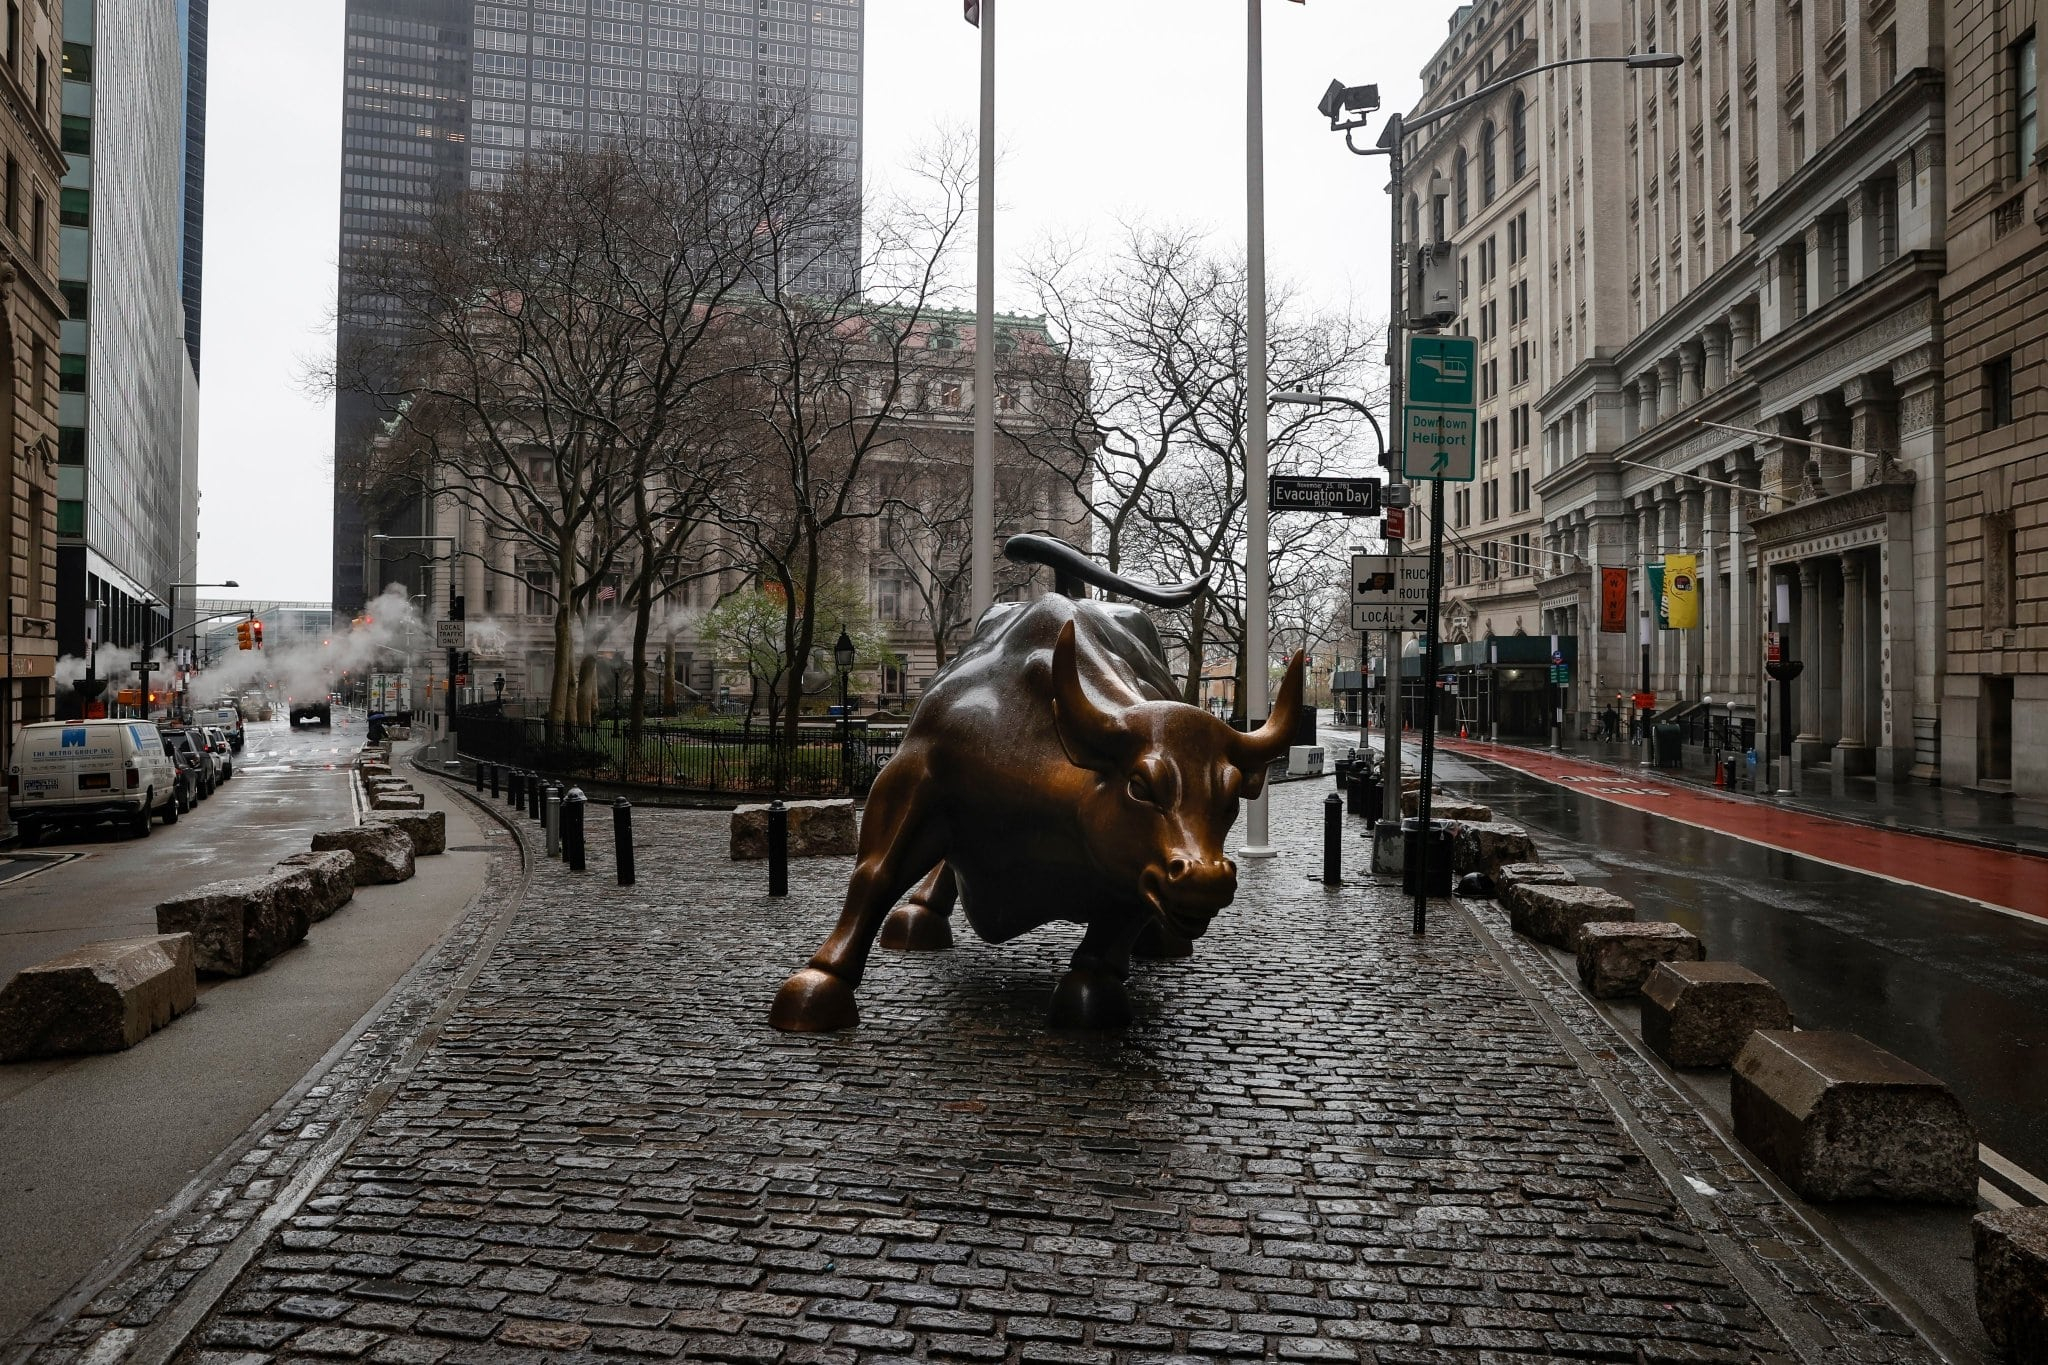 2048x1365 Charging Bull, sometimes referred to as the Wall Street Bull, bronze sculpture, Manhattan, New York